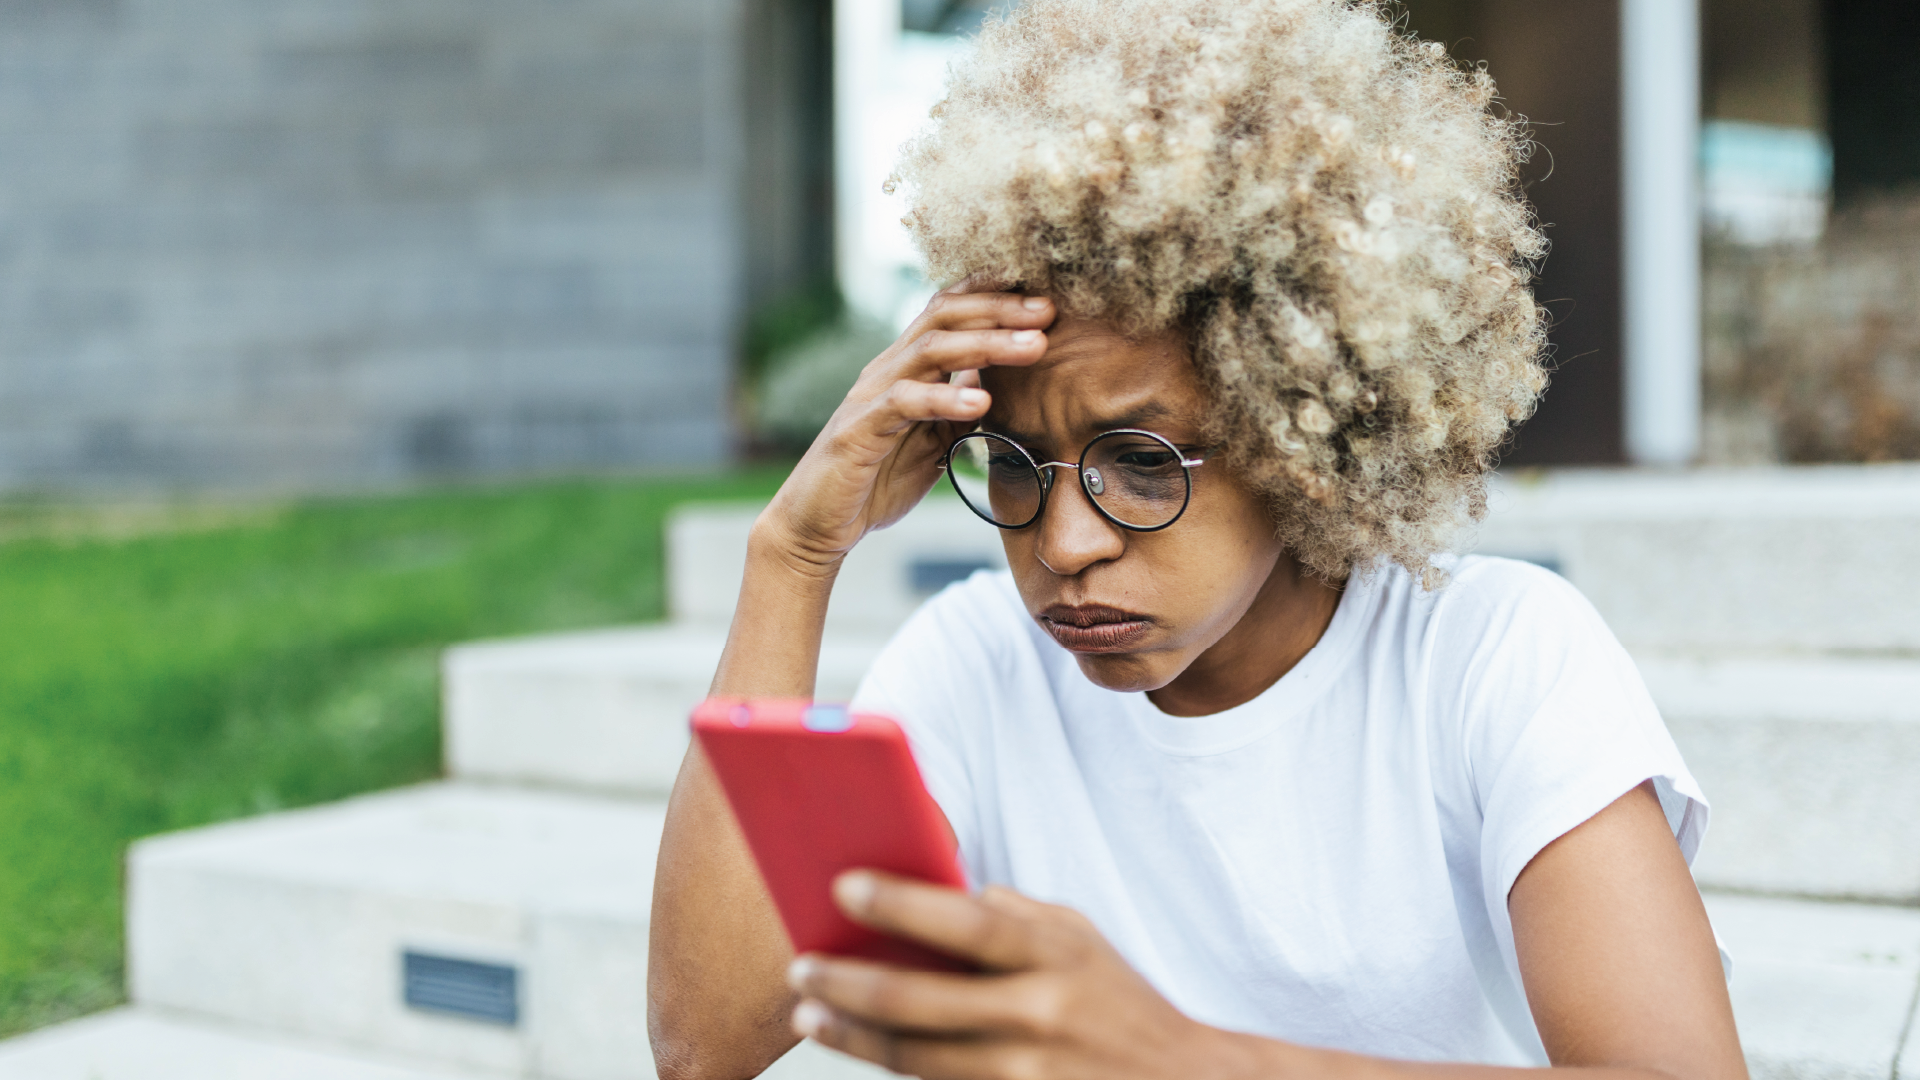 An image of a woman with a concerned expression on her phone.